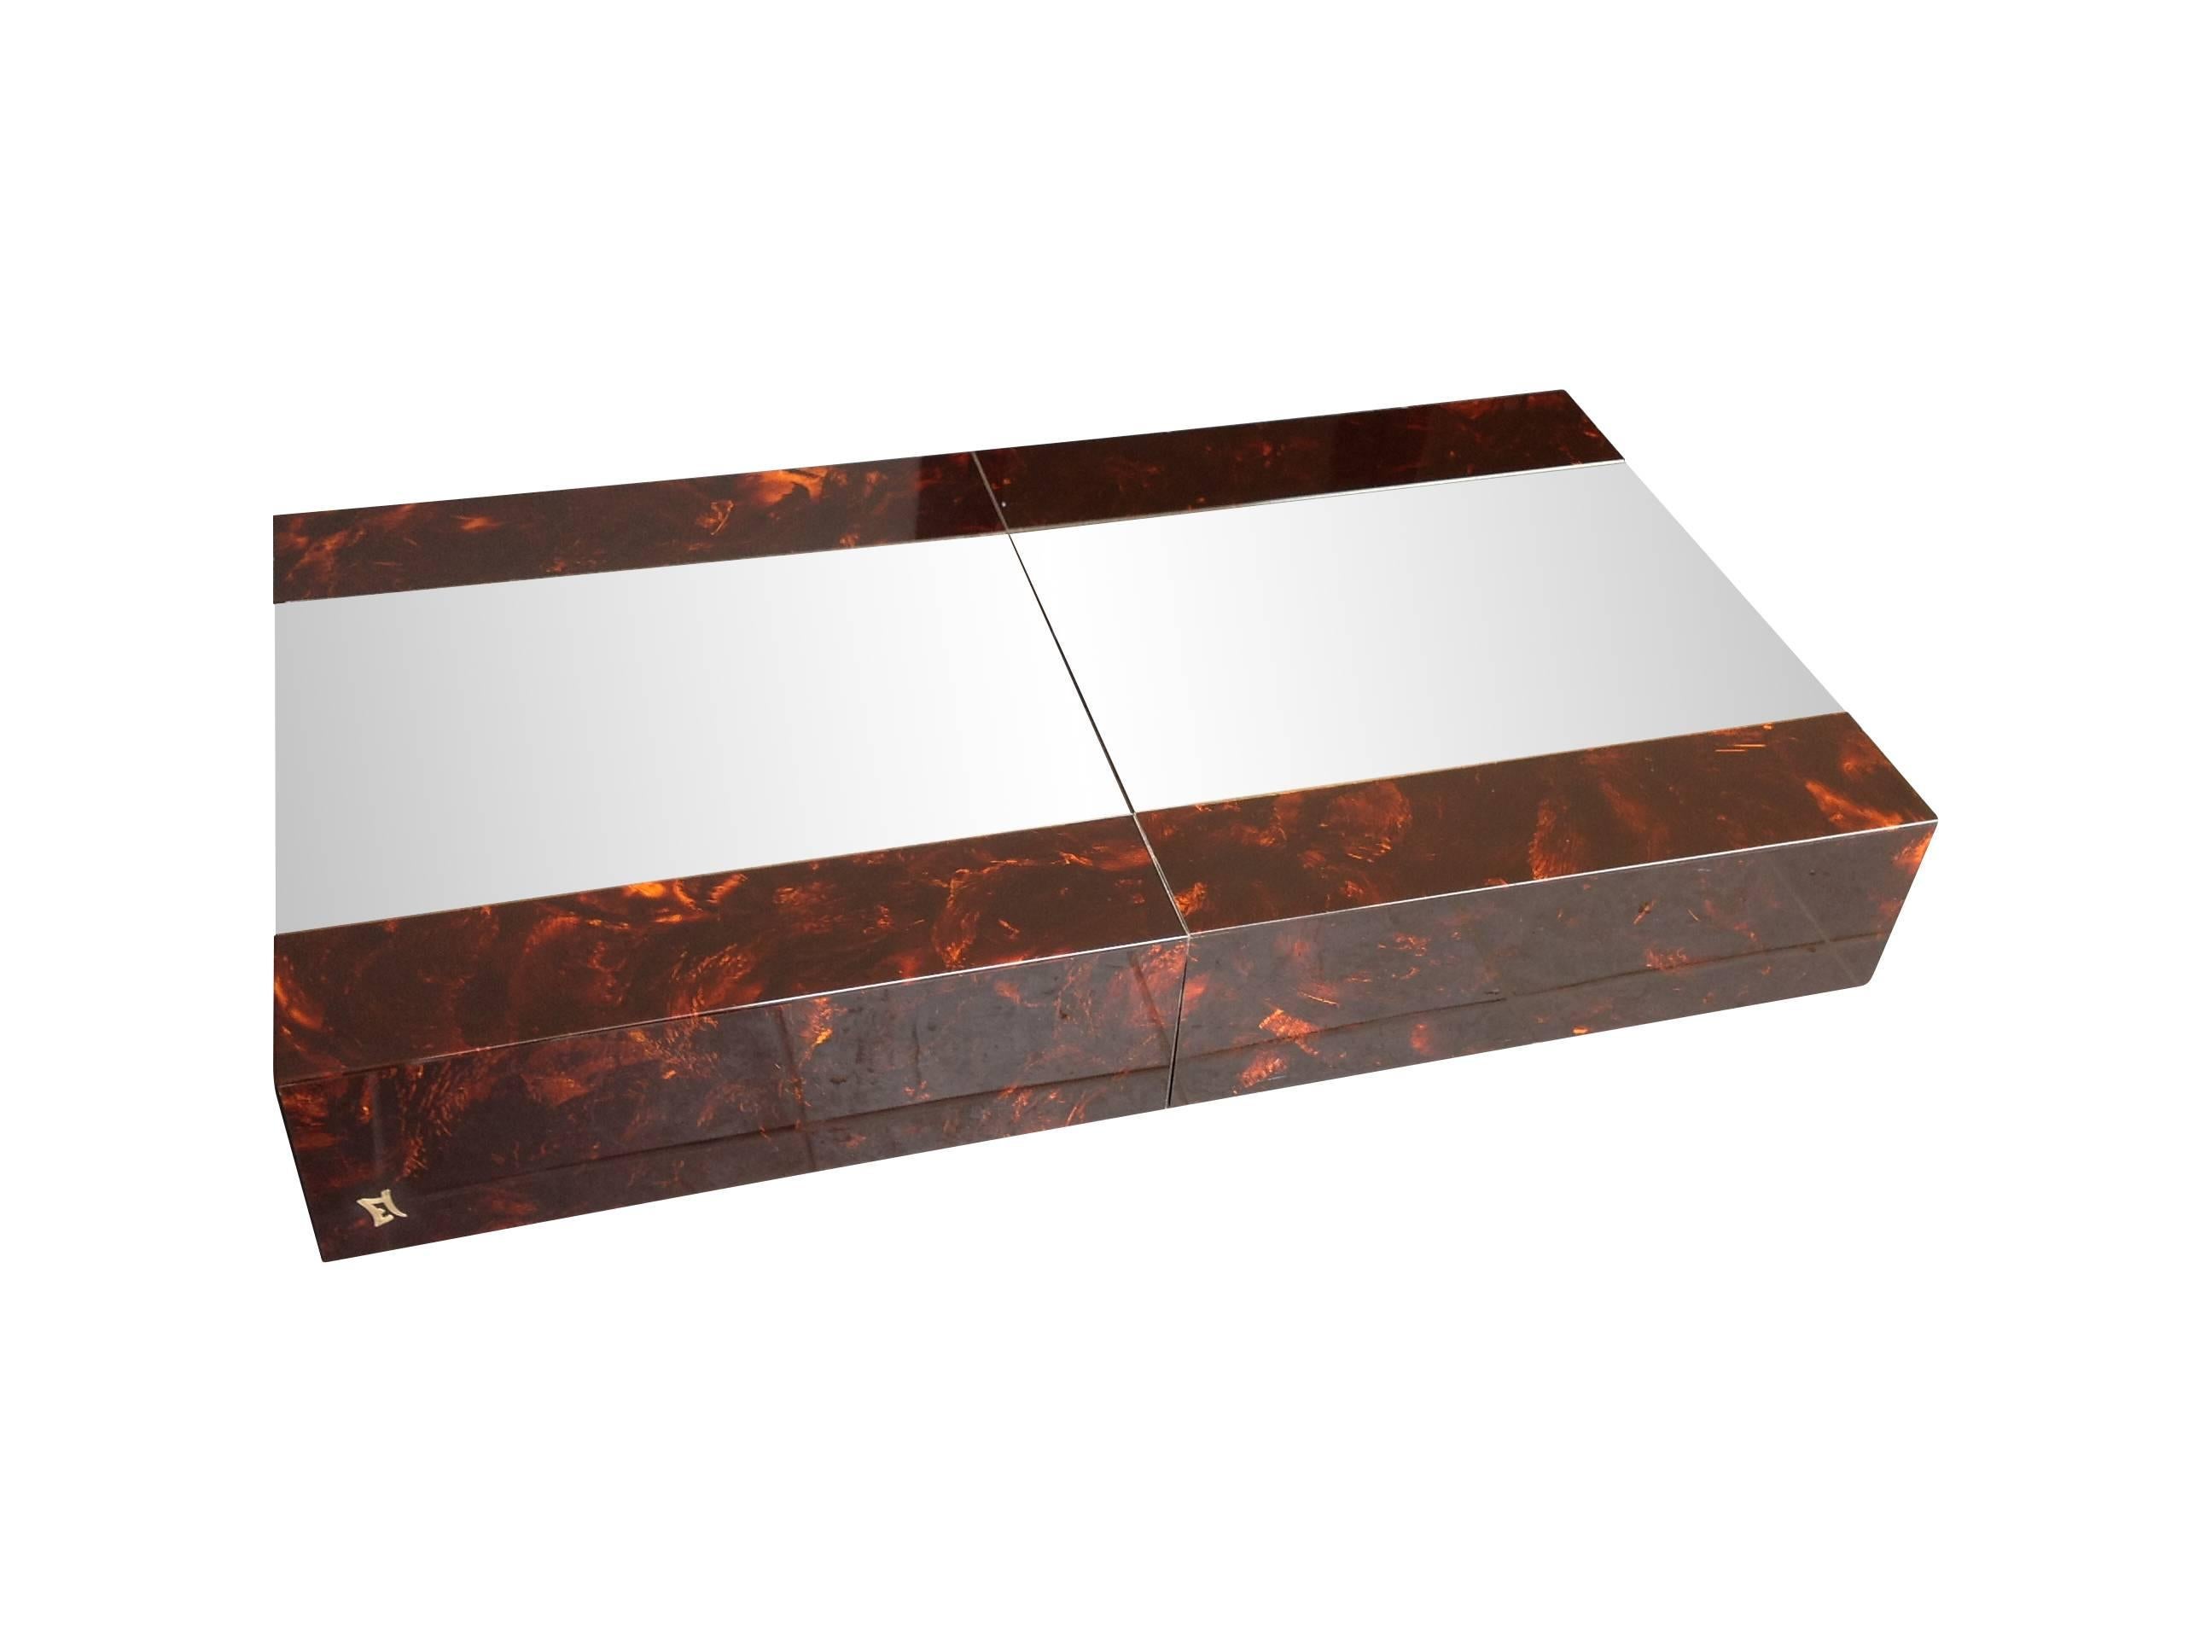 An Eric Maville and Jean Claude Mahey sliding coffee table with mirrored top and clad in faux tortoise shell acrylic. The top slides open to reveal a mirrored and chrome hidden bar with 2 levels for bottles and glasses. Signed with brass 